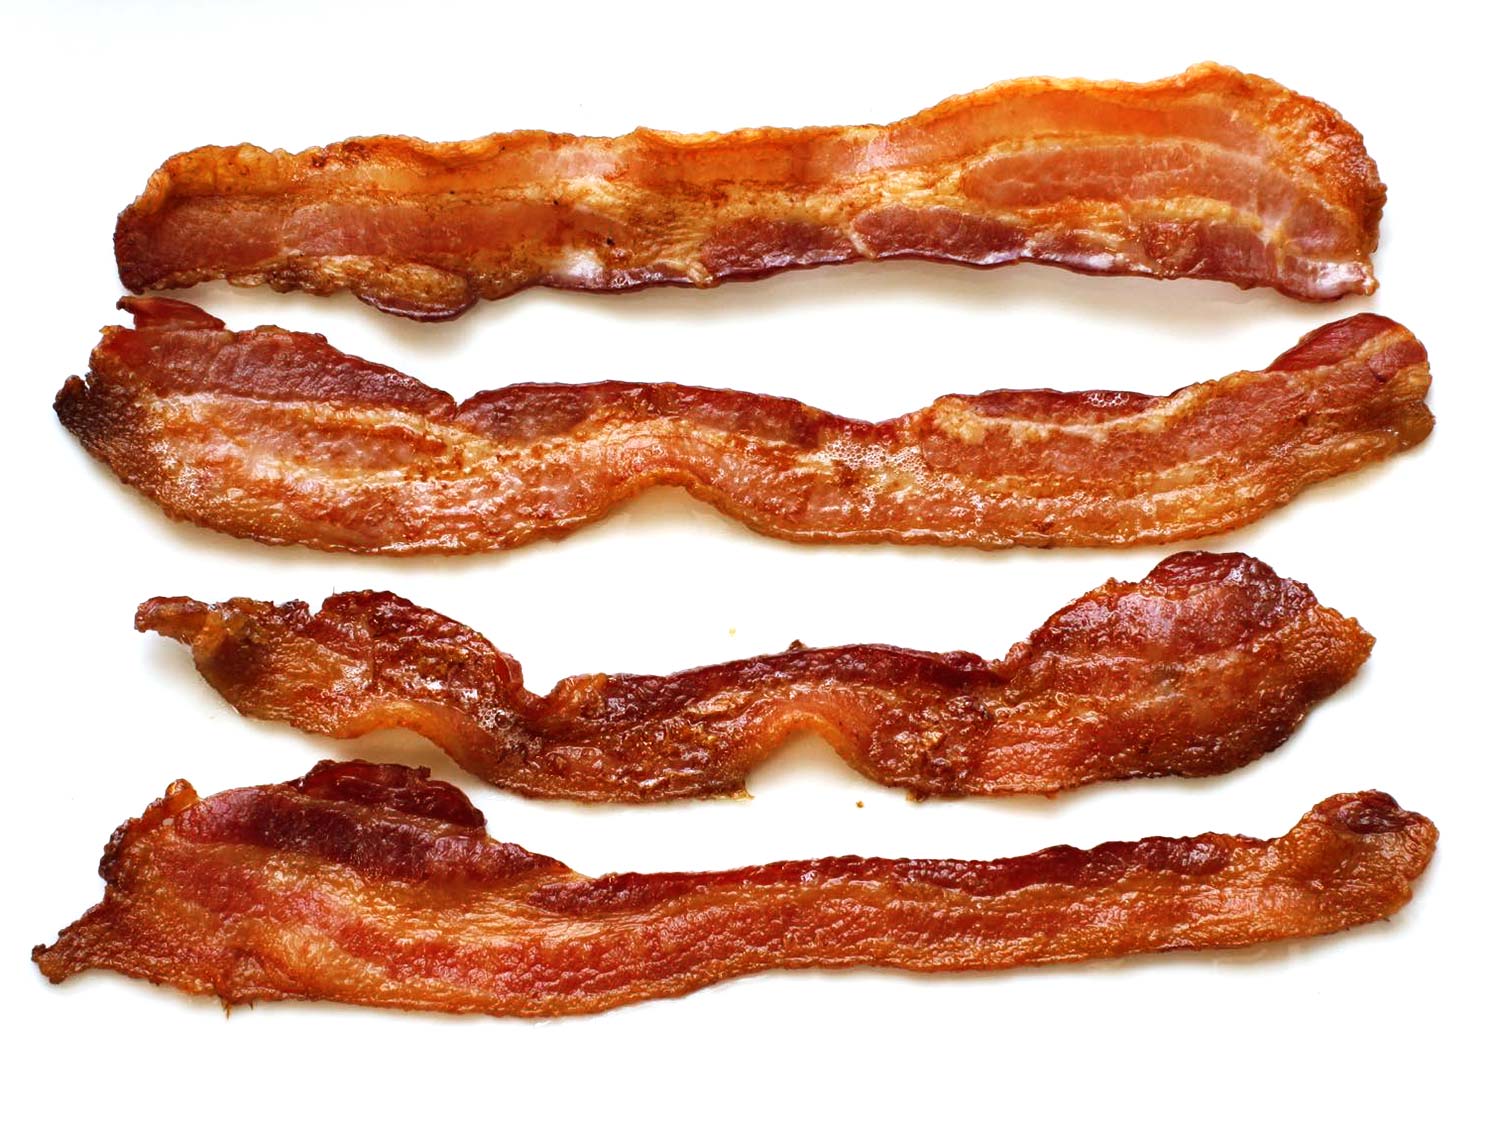 10 reasons why bacon is awesome - Food you should try